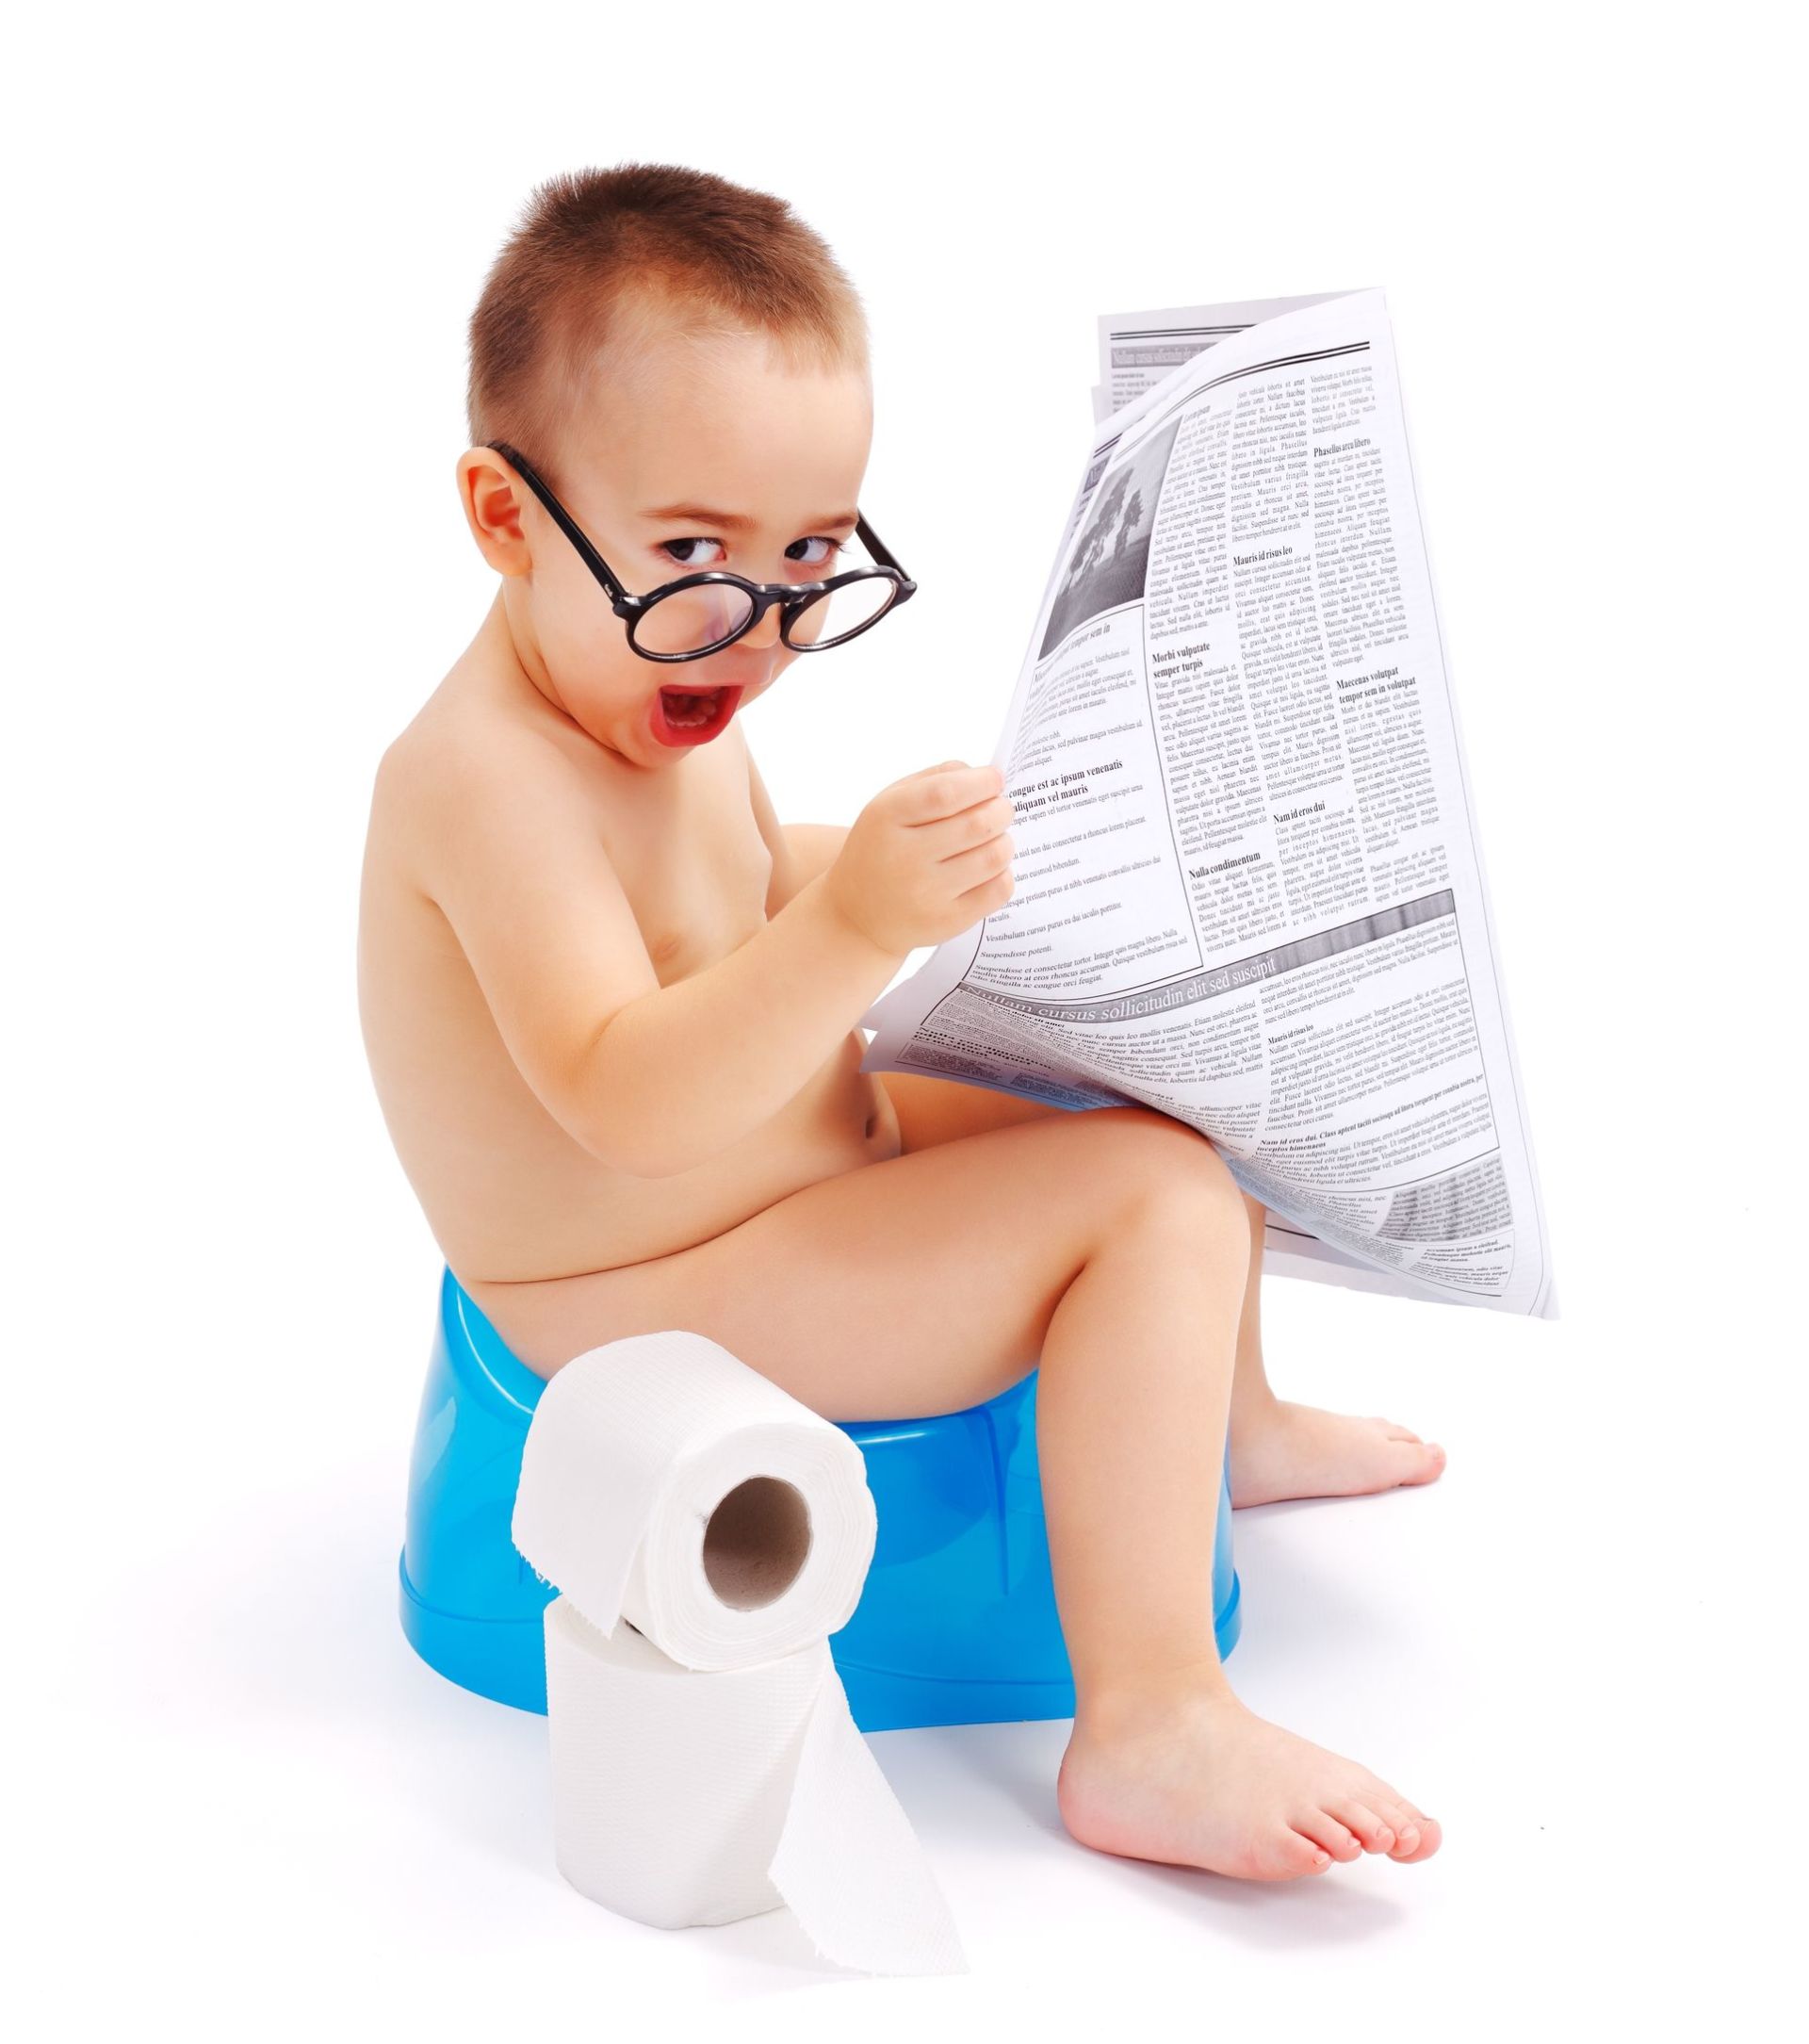 Little boy reading a newspaper on a potty chair